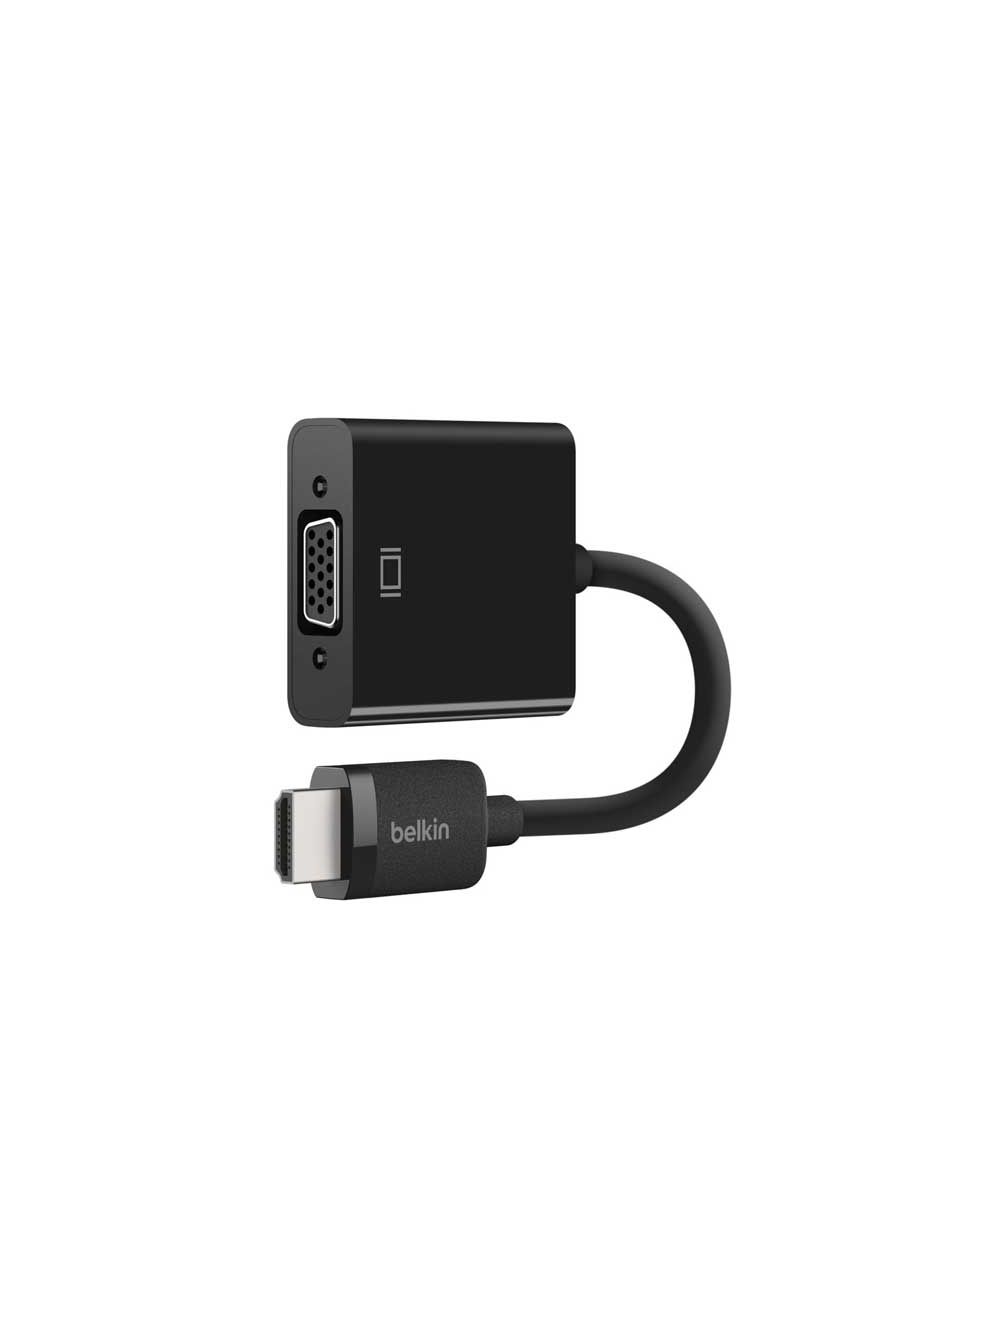 HDMI to VGA Adapter with Micro-USB Power- Black